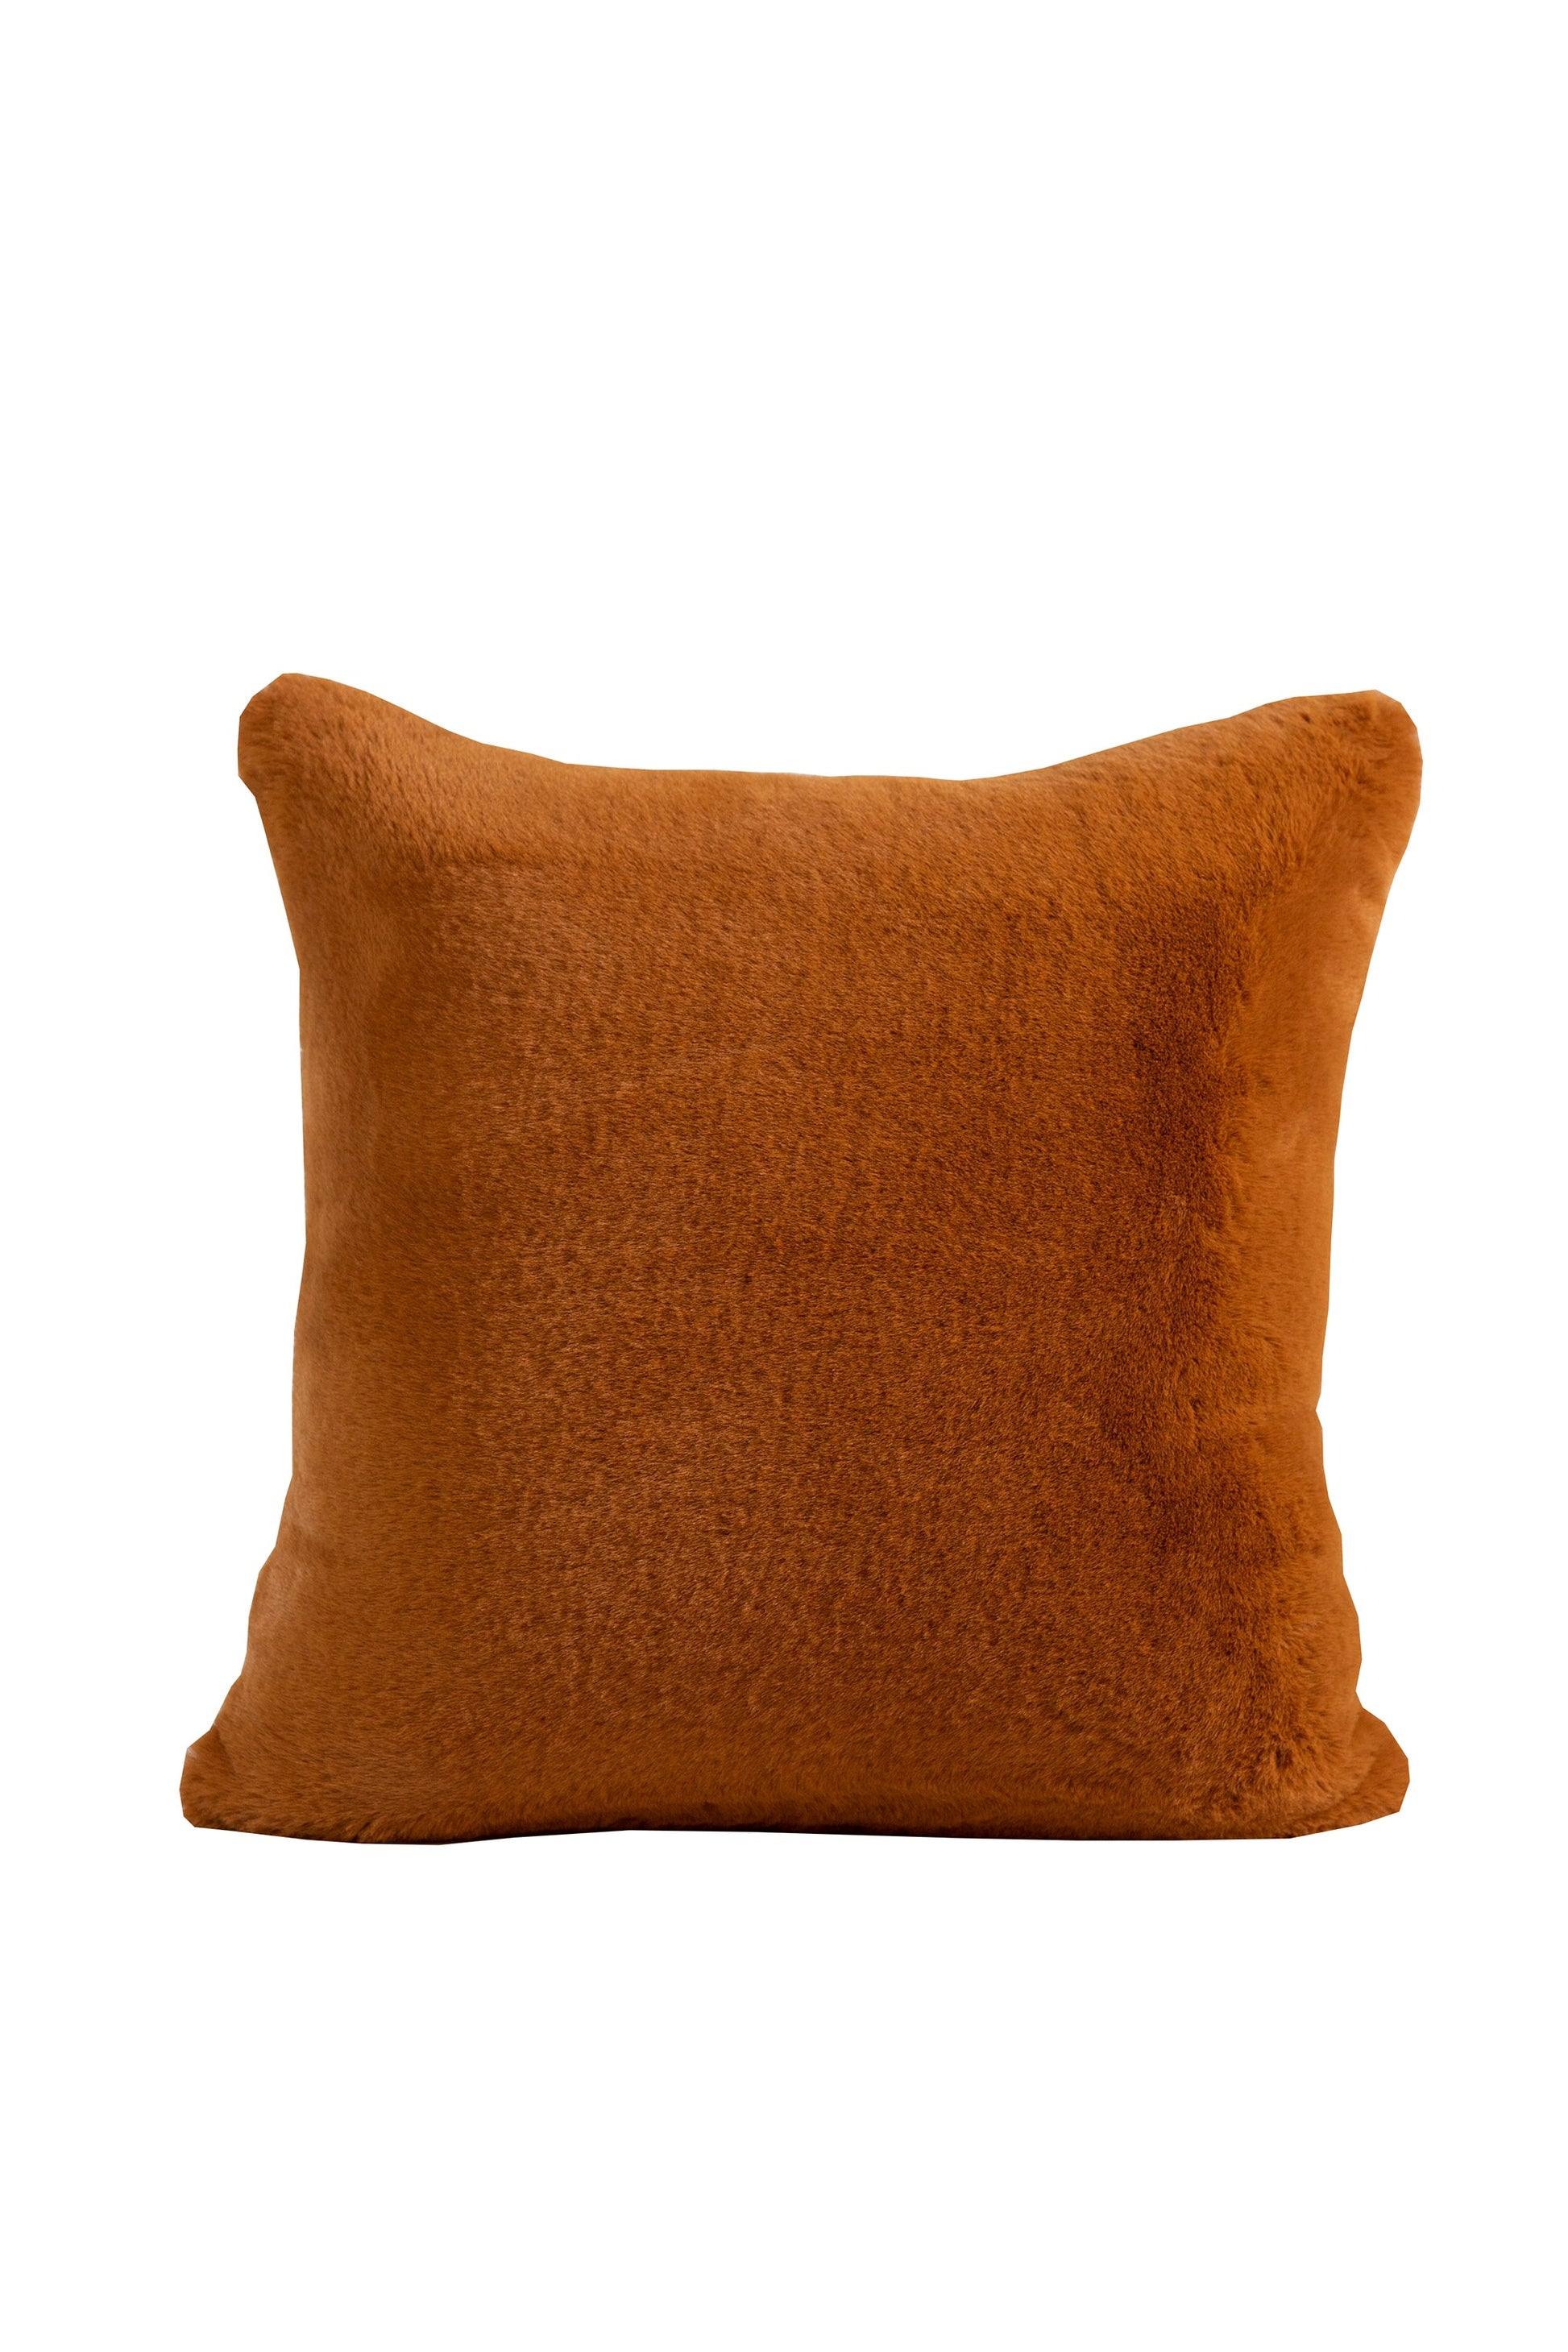 Made in Canada, Indigenous designed vegan leather and faux fur throw pillows.